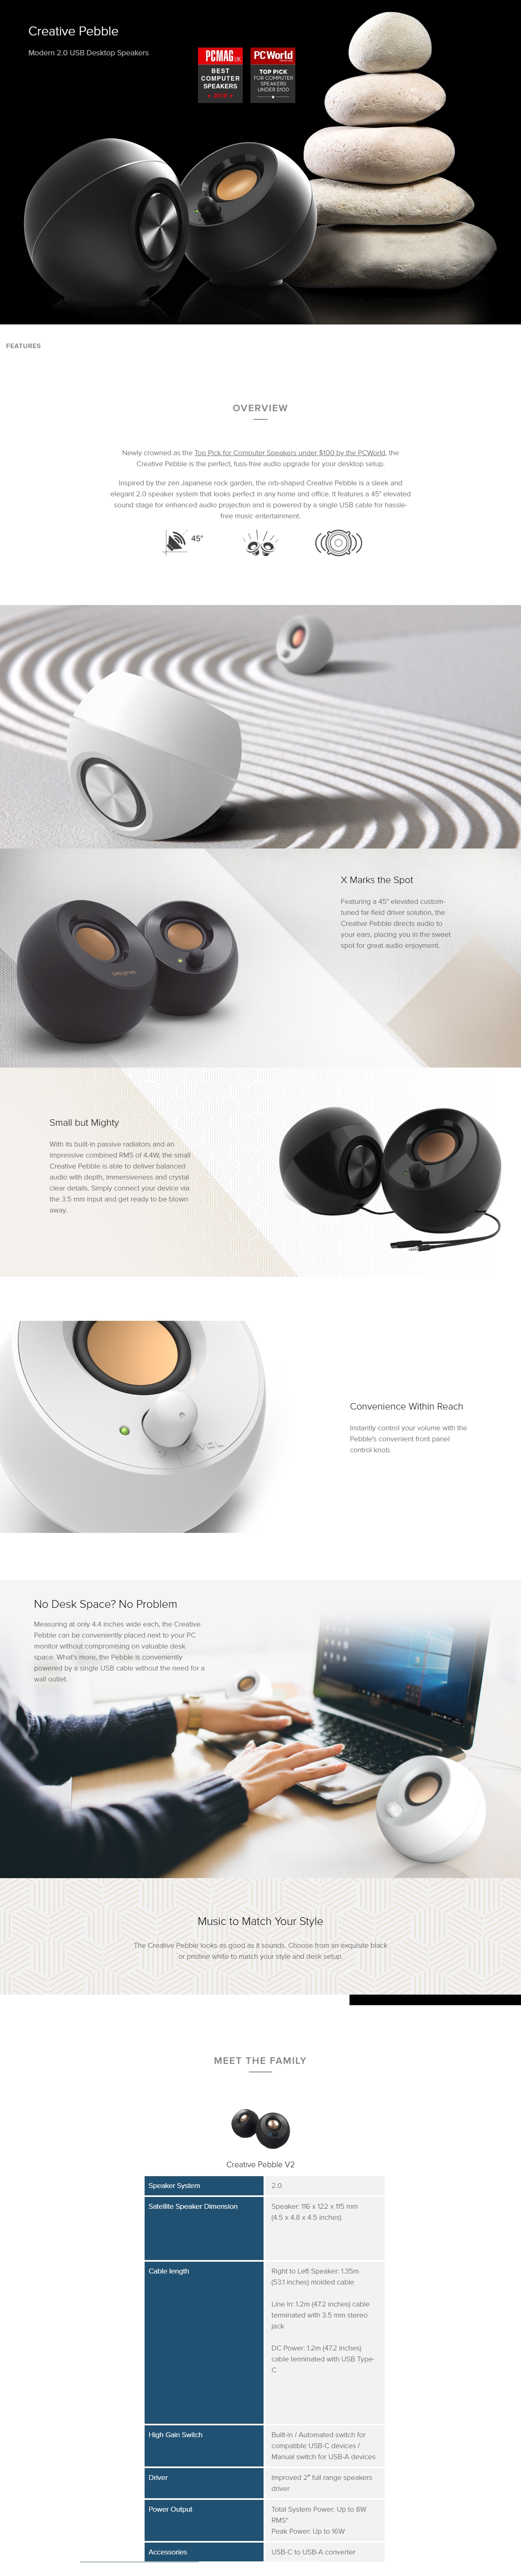 A large marketing image providing additional information about the product Creative Pebble 2.0 USB Stereo Speakers - Additional alt info not provided